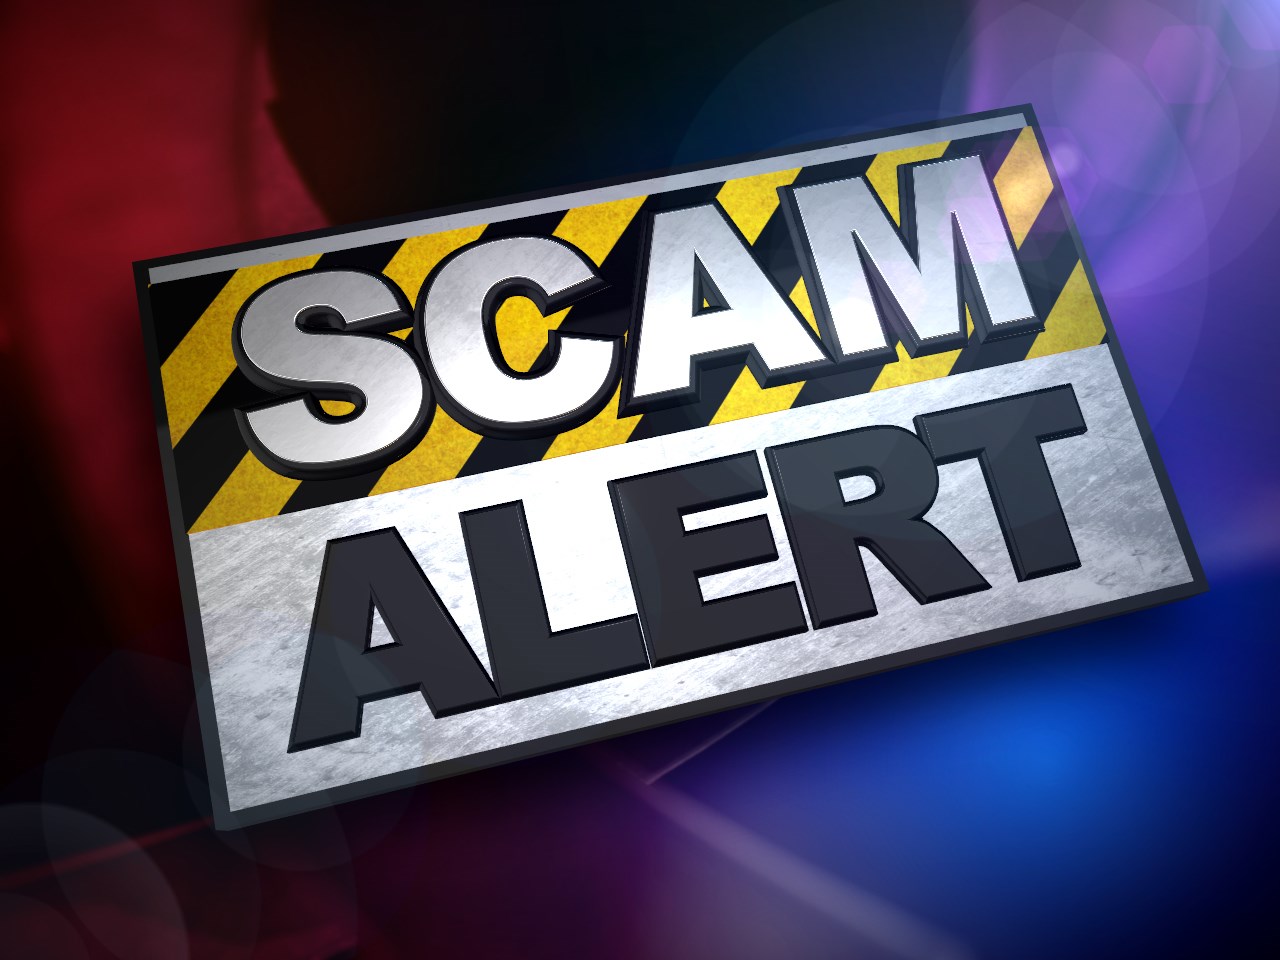 Police In McCreary Warn Of Social Work Scam - LEX18.com | Continuous News and StormTracker Weather - LEX18 Lexington KY News